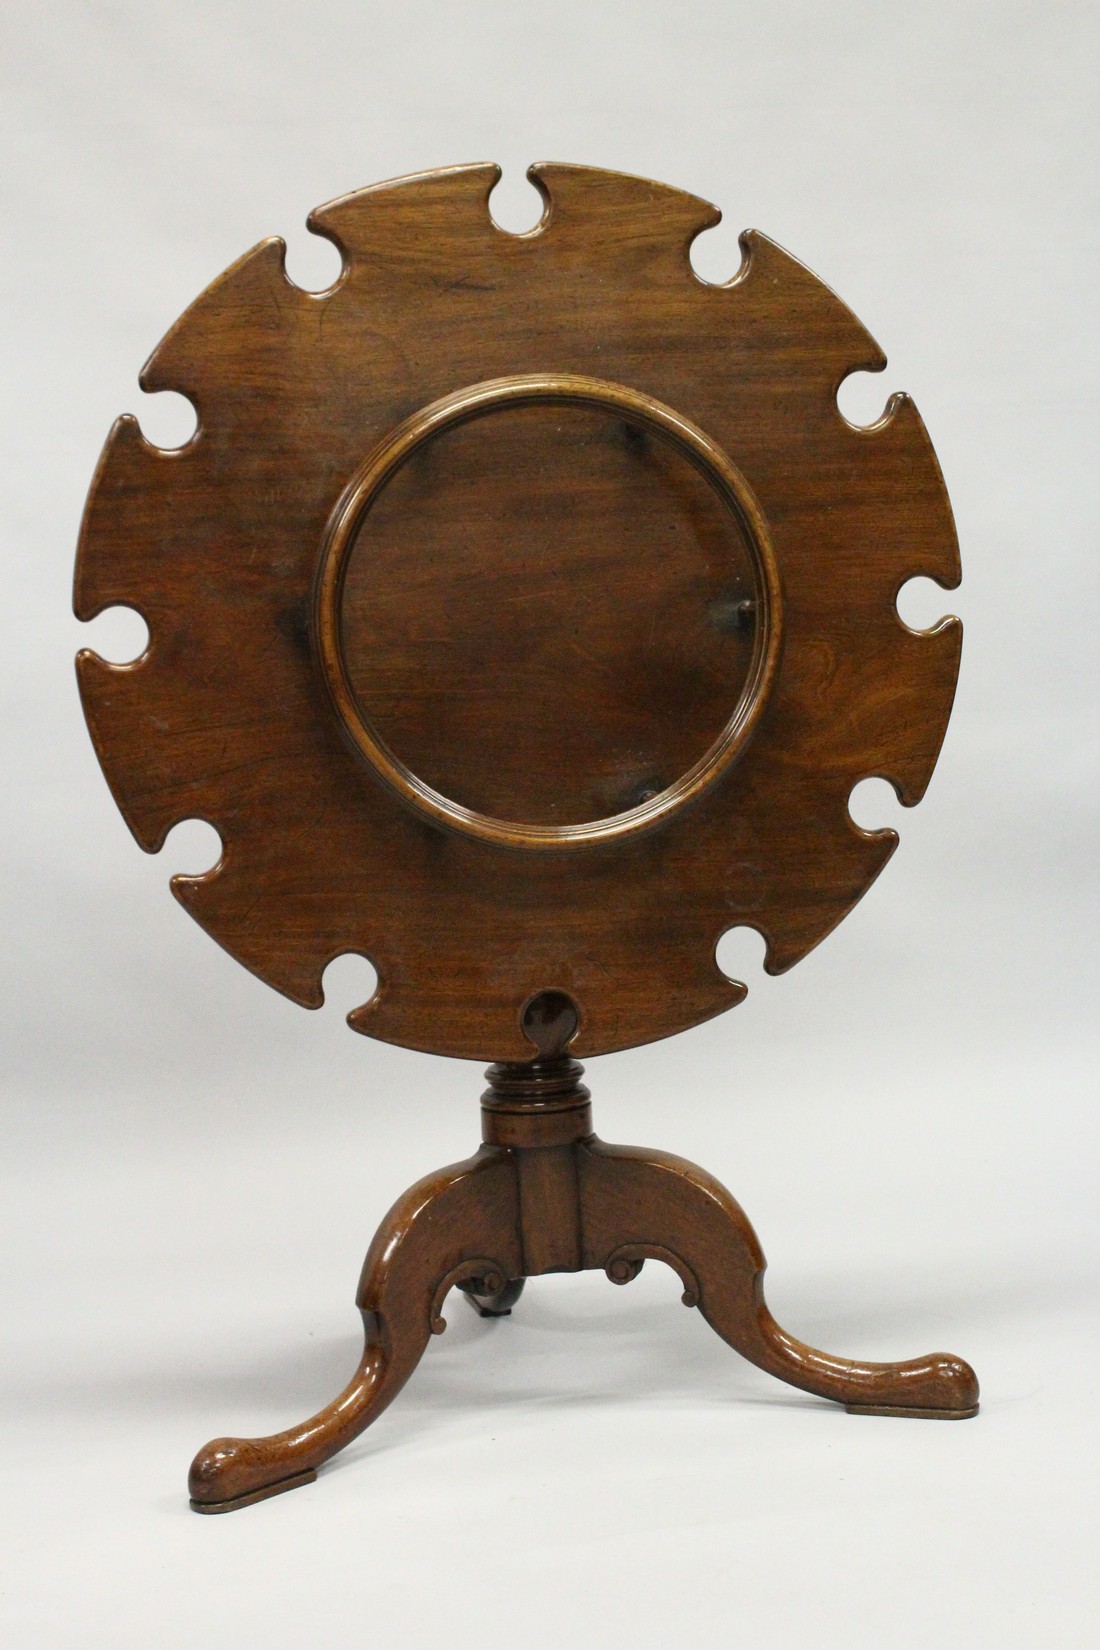 A GEORGE III STYLE MAHOGANY SHIP'S TRIPOD TABLE with centre section for bottles. The sides with - Image 6 of 6